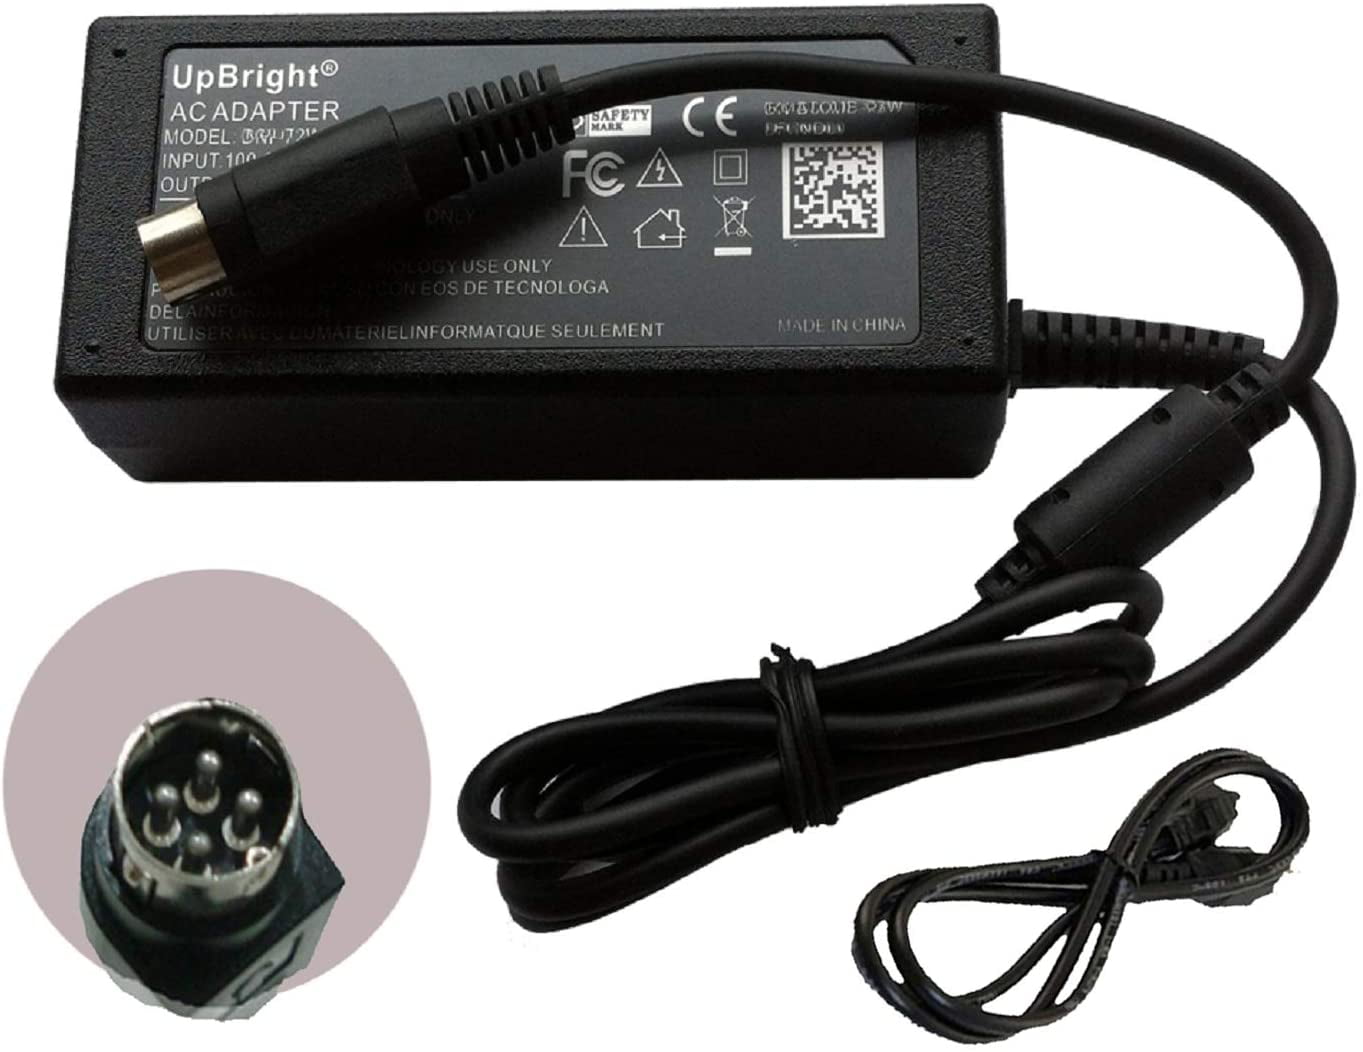 UpBright New 24V AC/DC Adapter Replacement for Epson Workforce DS-510 A221B 2115842-00 Sheetfed Scanner/Perfection V750 V750-M Pro Photo Scanner p/n B11B172011 B11B178011 B11B189071 B11B189081 